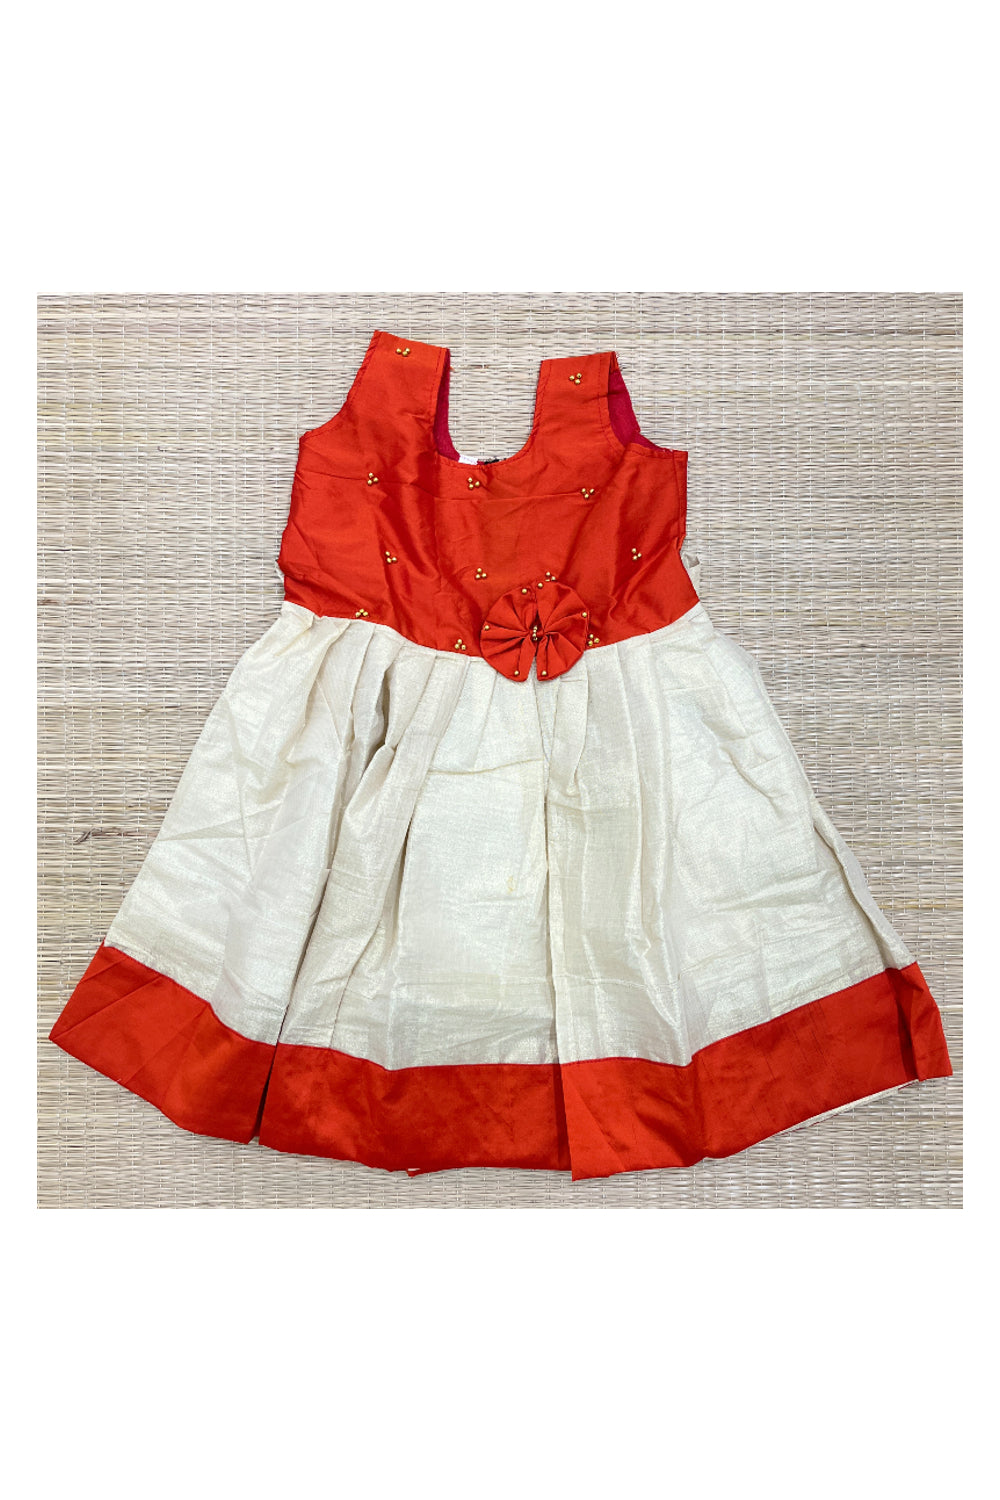 Southloom Kerala Tissue Frock with Red Bead Work Designs for Kids (3 Years)